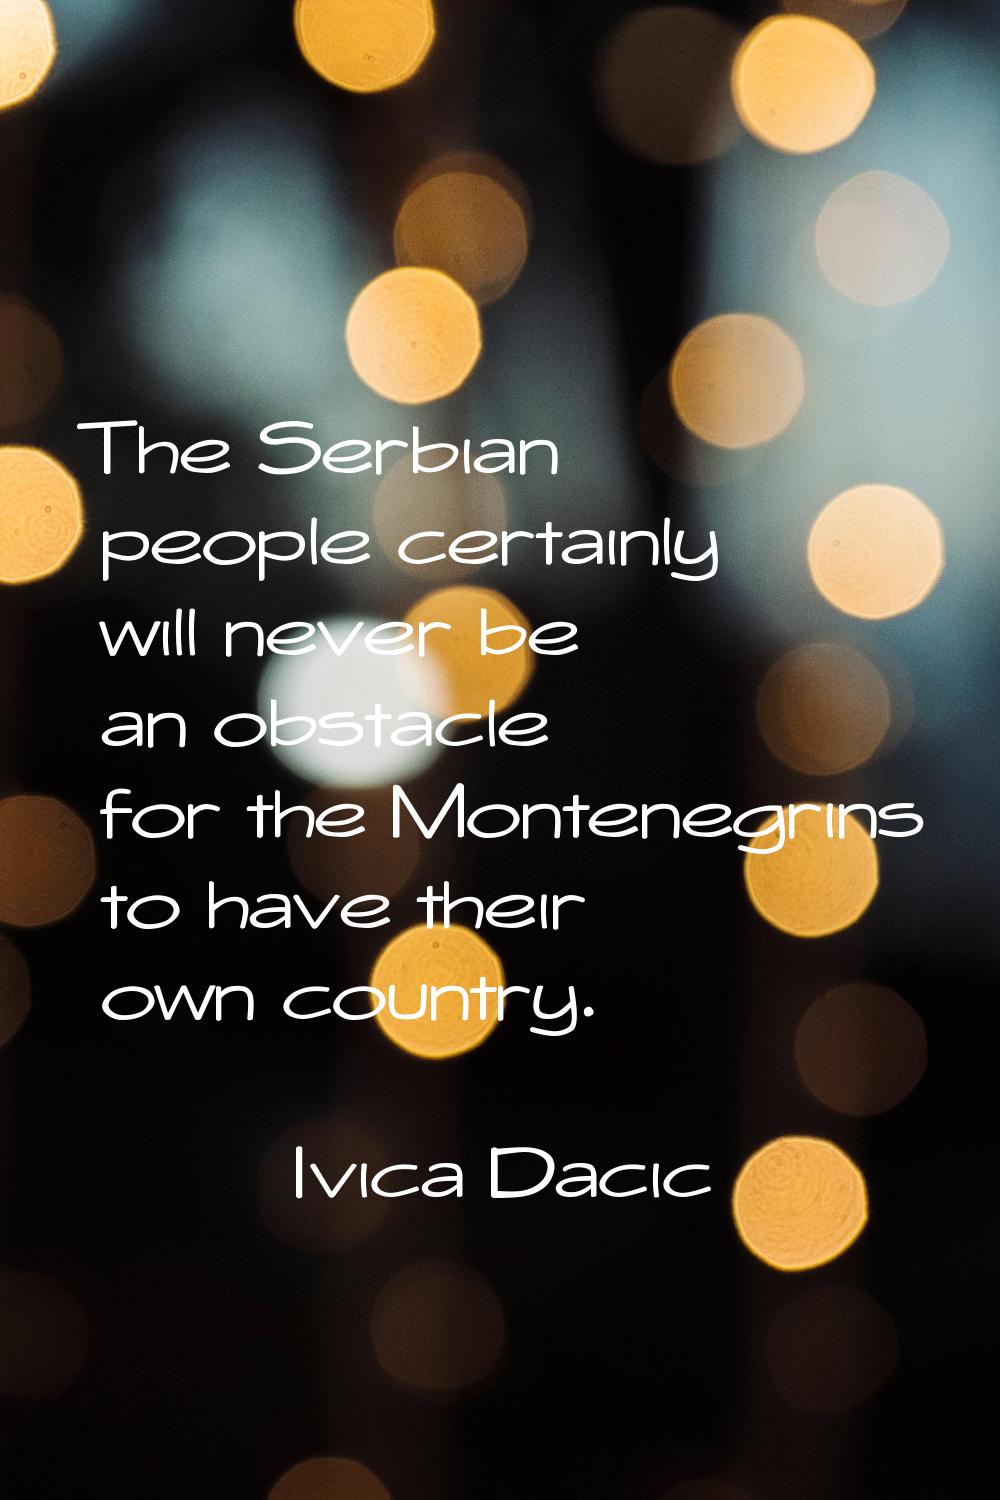 The Serbian people certainly will never be an obstacle for the Montenegrins to have their own count